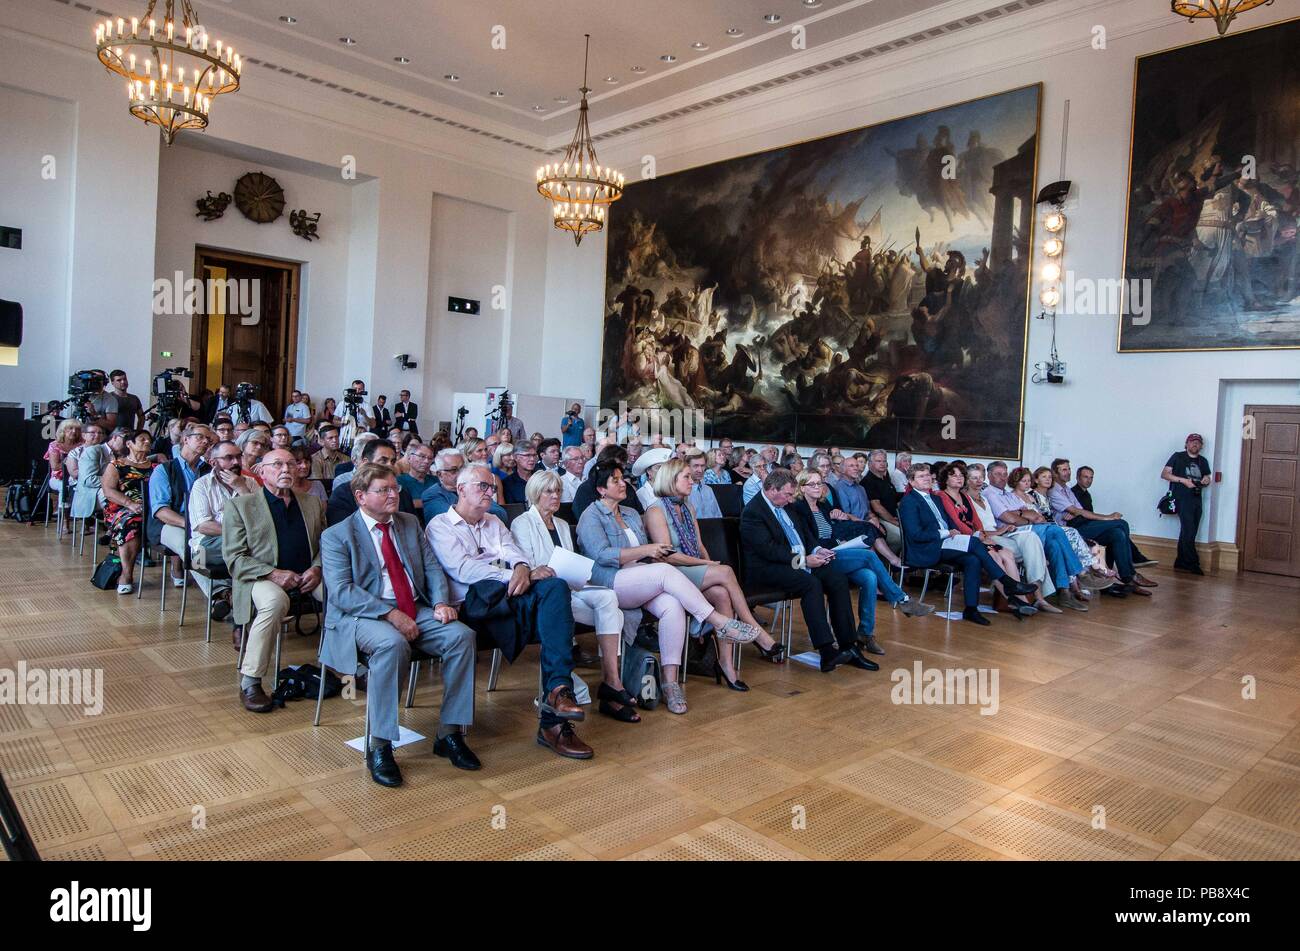 Munich, Bavaria, Germany. 27th July, 2018. Lifeline Captain CLAUS PETER REISCH sits in the first row awaiting his award with a view of drowning people in the artwork on the wall of the Bavarian Landtag. Captain Claus Peter Reisch of the Mission Lifeline NGO received the Europa-Preis (Europe Award) at Bavaria's Landtag (Parliament) for his humanitarian engagement in the Mediterranean in rescuing hundreds migrants in danger of drowning. Reisch was recently arrested in Malta, facing various charges related to the use of the vessel in rescue activities. He is currently out on bail and has surr Stock Photo